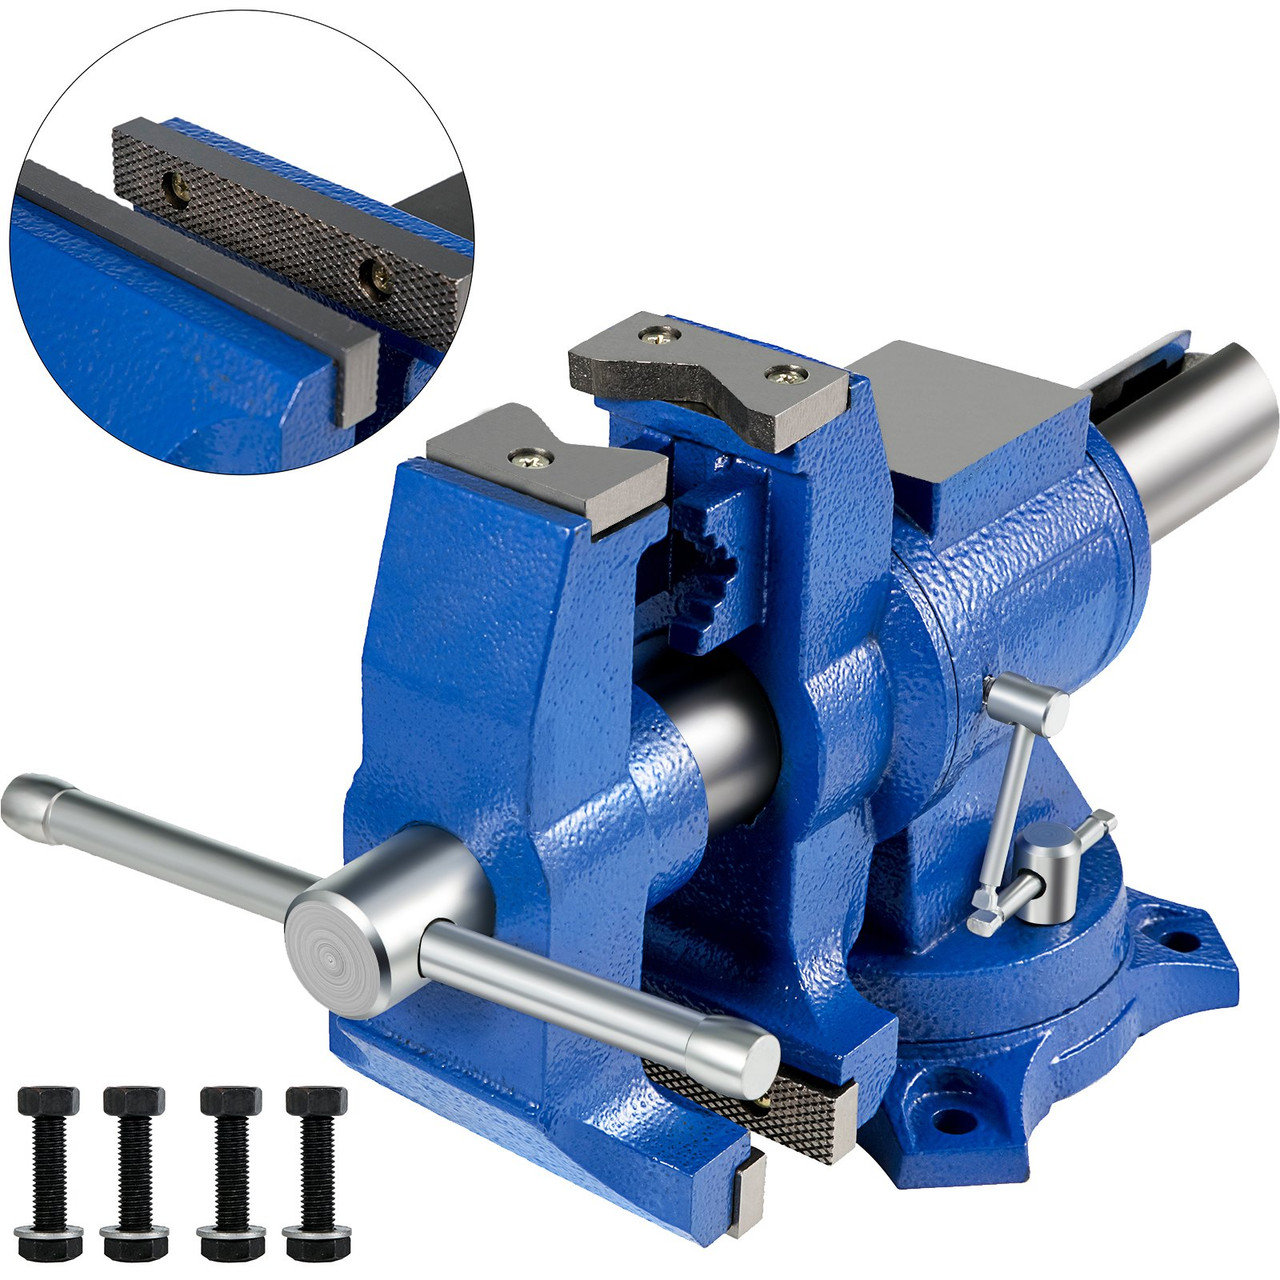 Multipurpose Bench Vise 6" 30Kn Heavy Duty with 360ø Swivel Base and Head